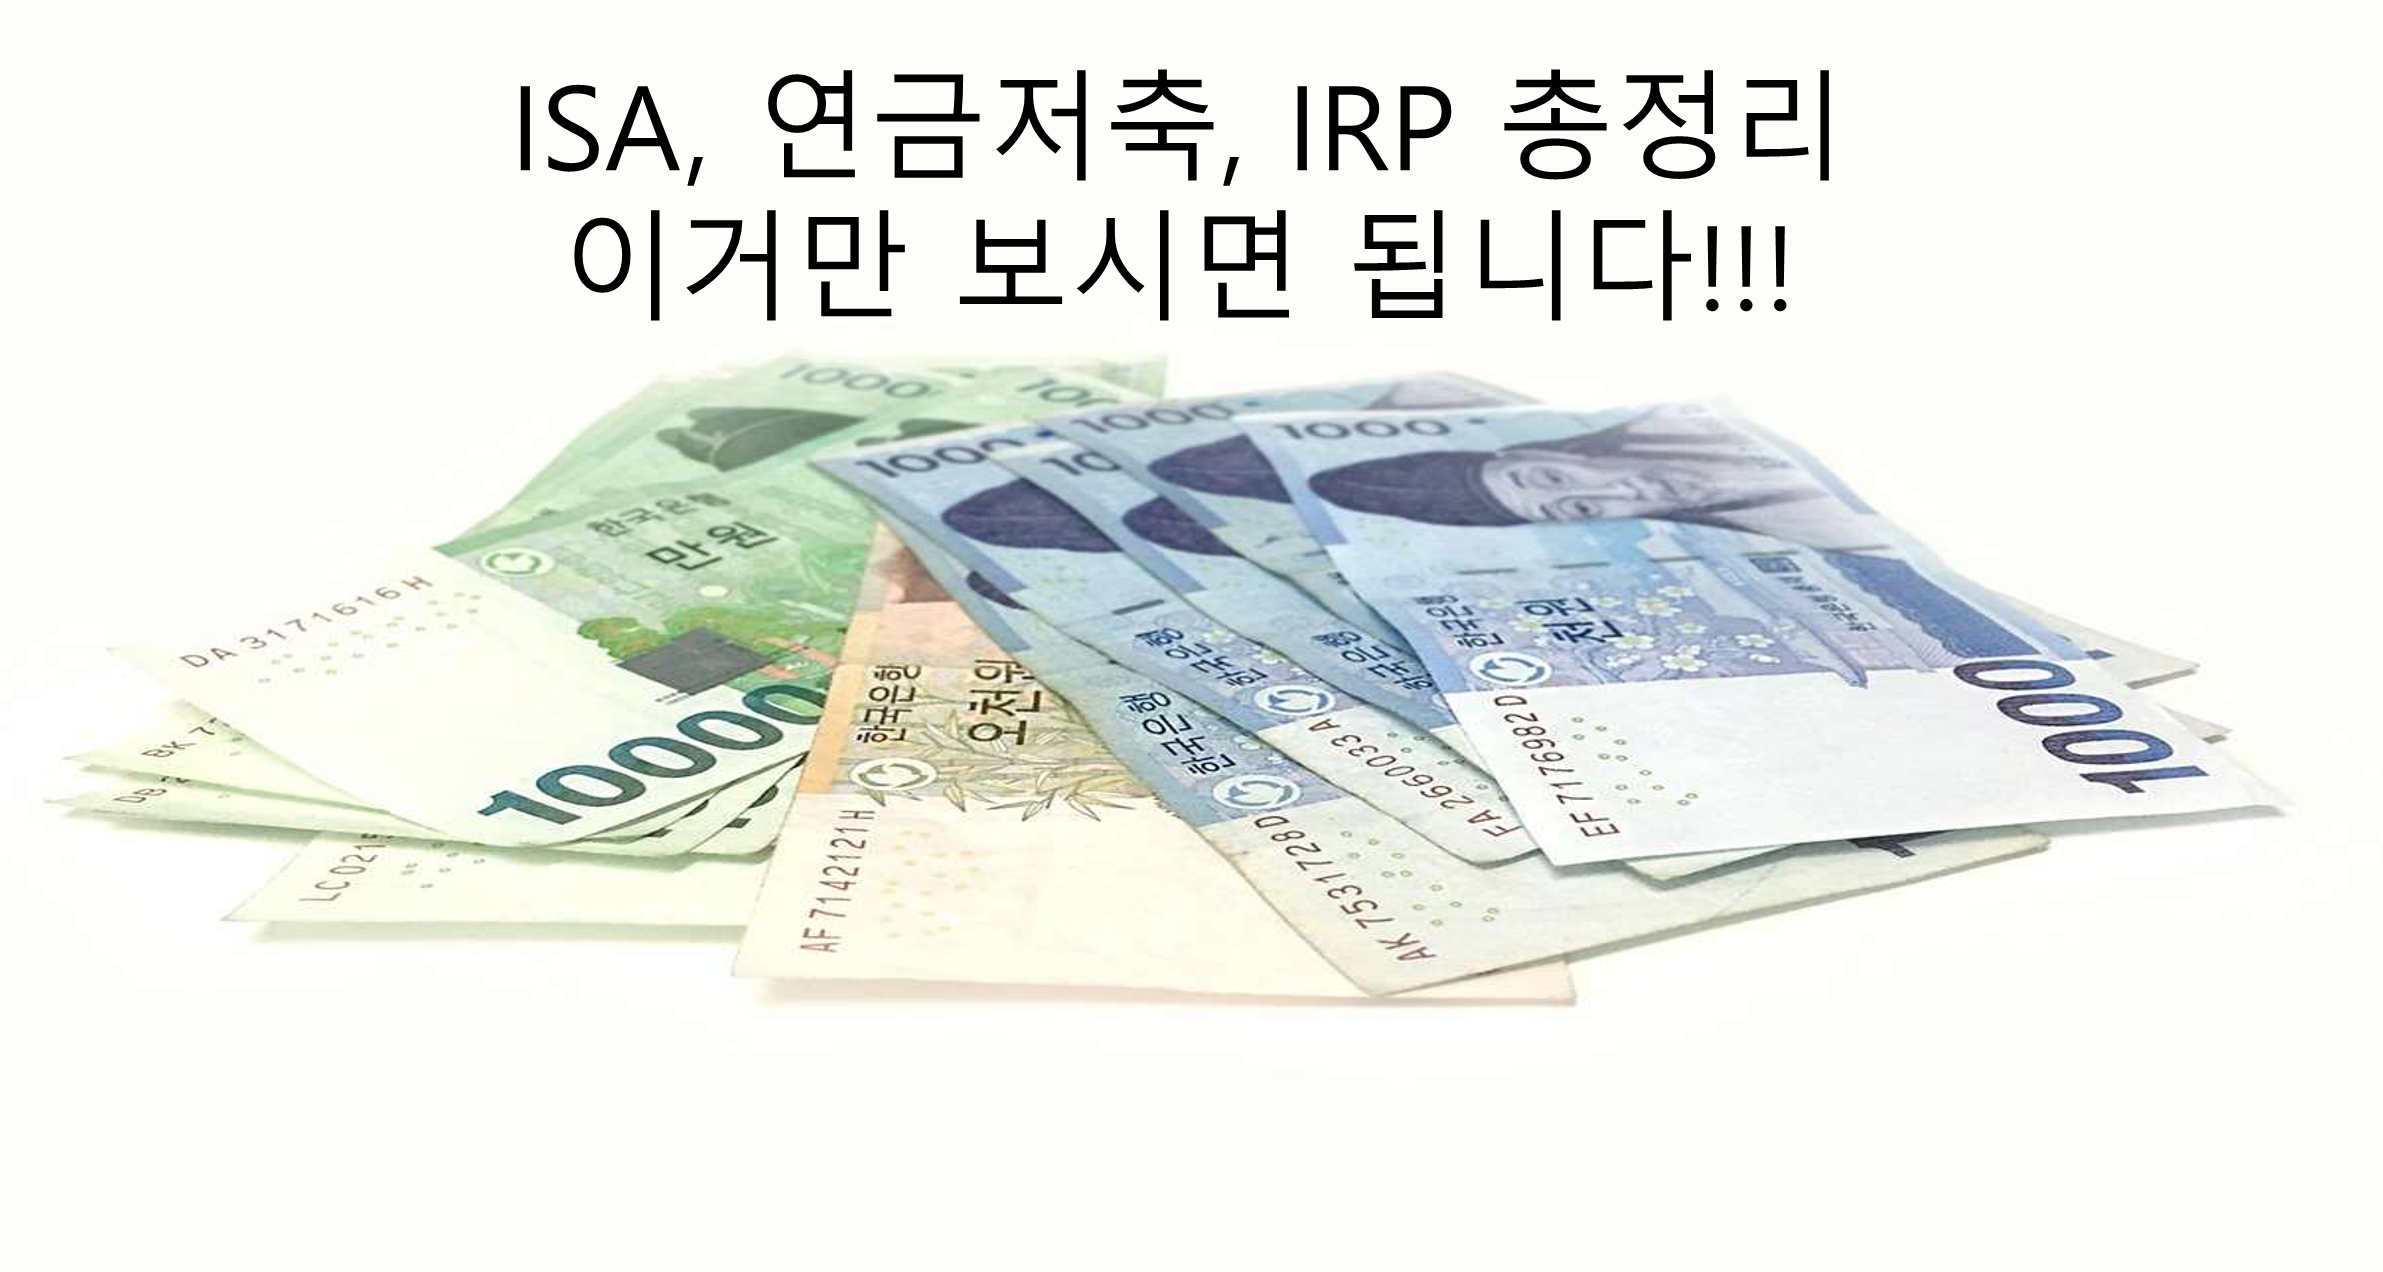 ISA, 연급저축, IRP 썸네일